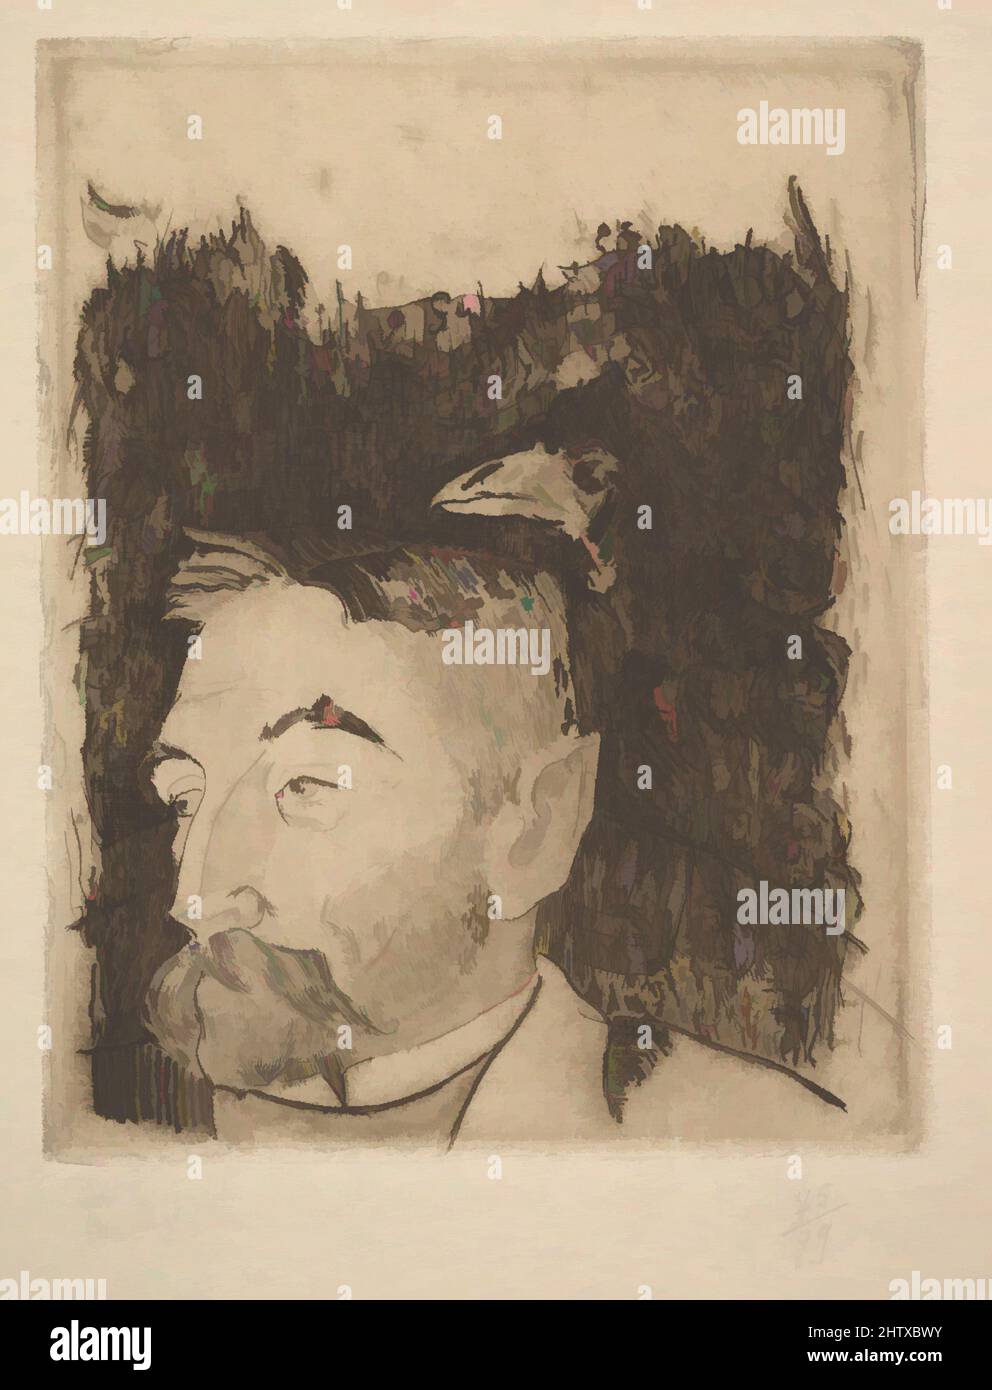 Art inspired by Portrait of Stéphane Mallarmé, 1891, etching, 7 3/16 x 5 11/16 in. (18.3 x 14.4 cm): plate, Prints, Paul Gauguin (French, Paris 1848–1903 Atuona, Hiva Oa, Marquesas Islands, Classic works modernized by Artotop with a splash of modernity. Shapes, color and value, eye-catching visual impact on art. Emotions through freedom of artworks in a contemporary way. A timeless message pursuing a wildly creative new direction. Artists turning to the digital medium and creating the Artotop NFT Stock Photo